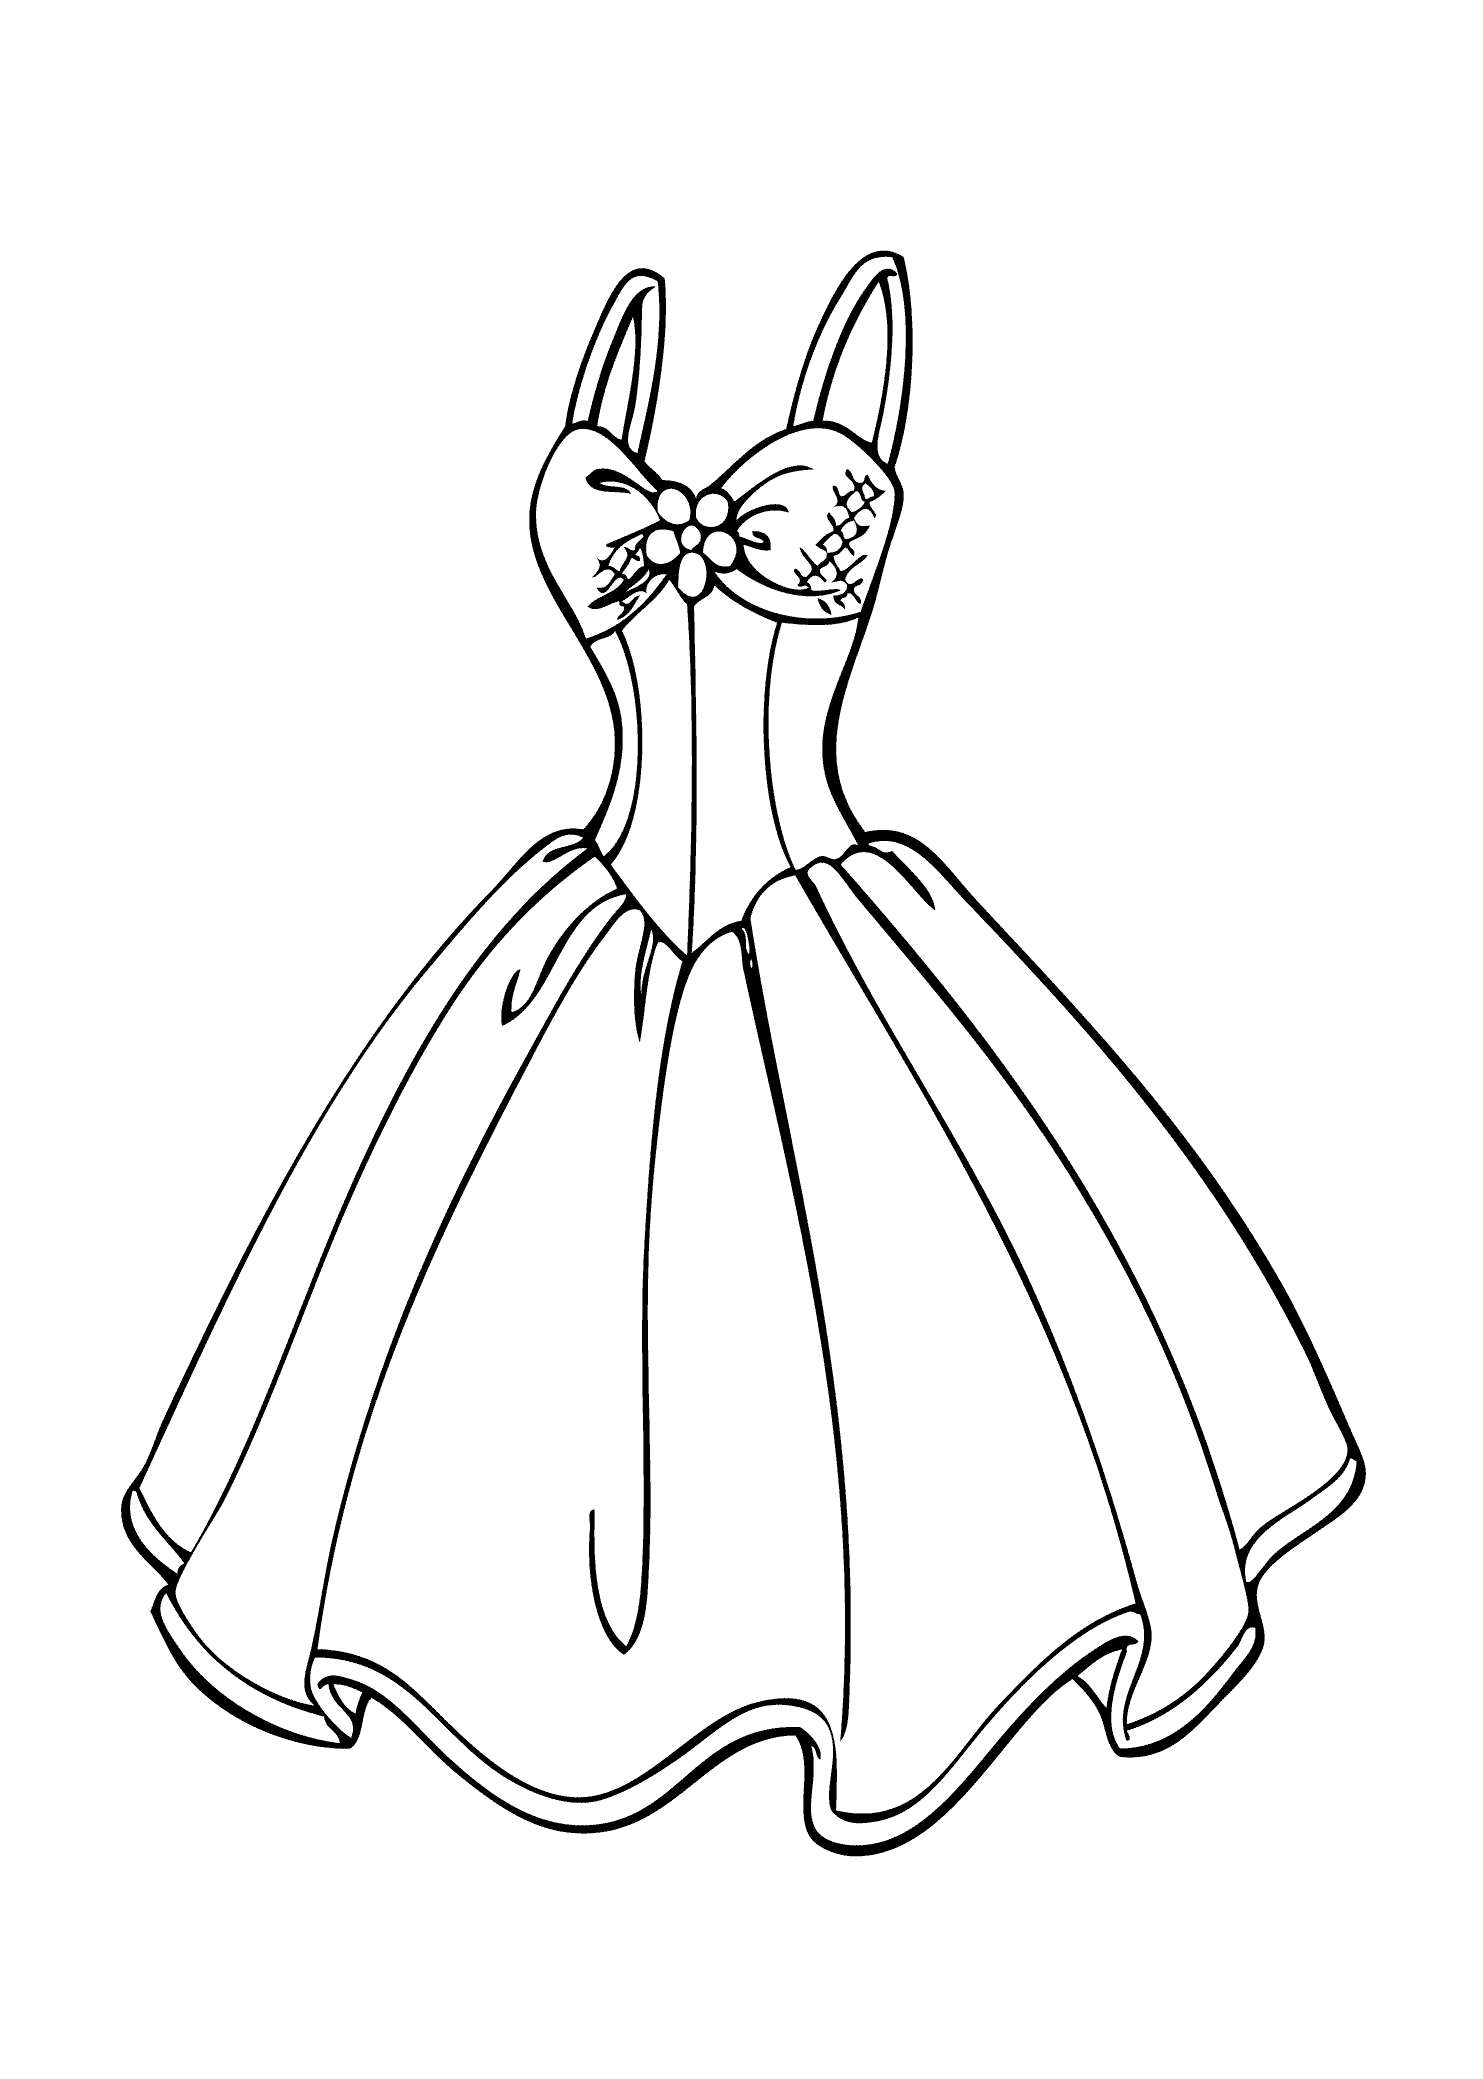 Cinderella Dress Coloring Page | Coloring Pages For All Ages